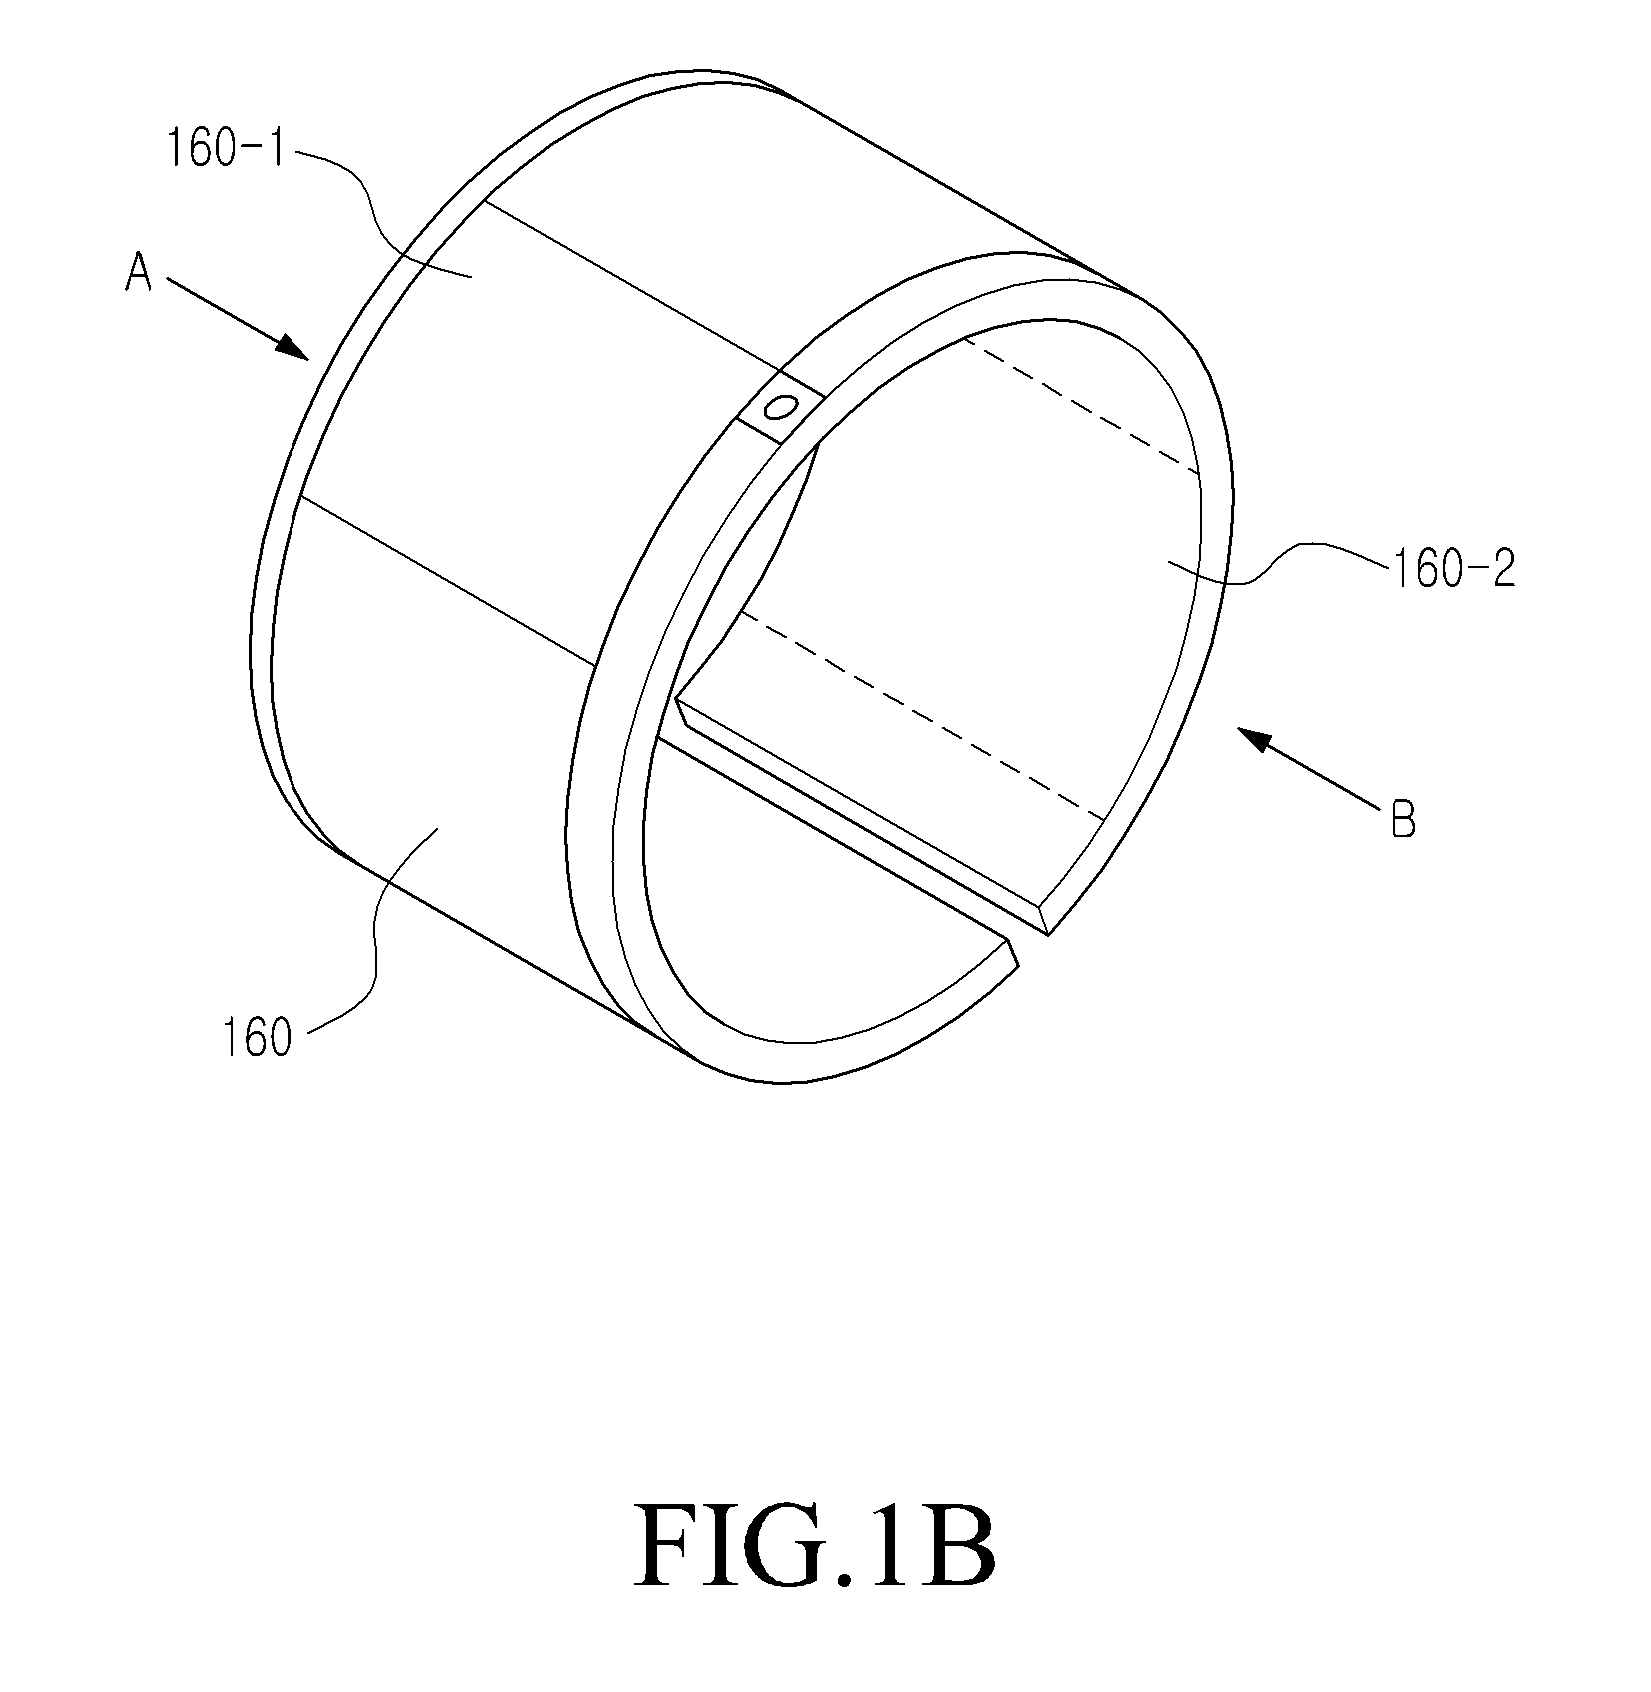 Apparatus and method for reducing current consumption in portable terminal with flexible display